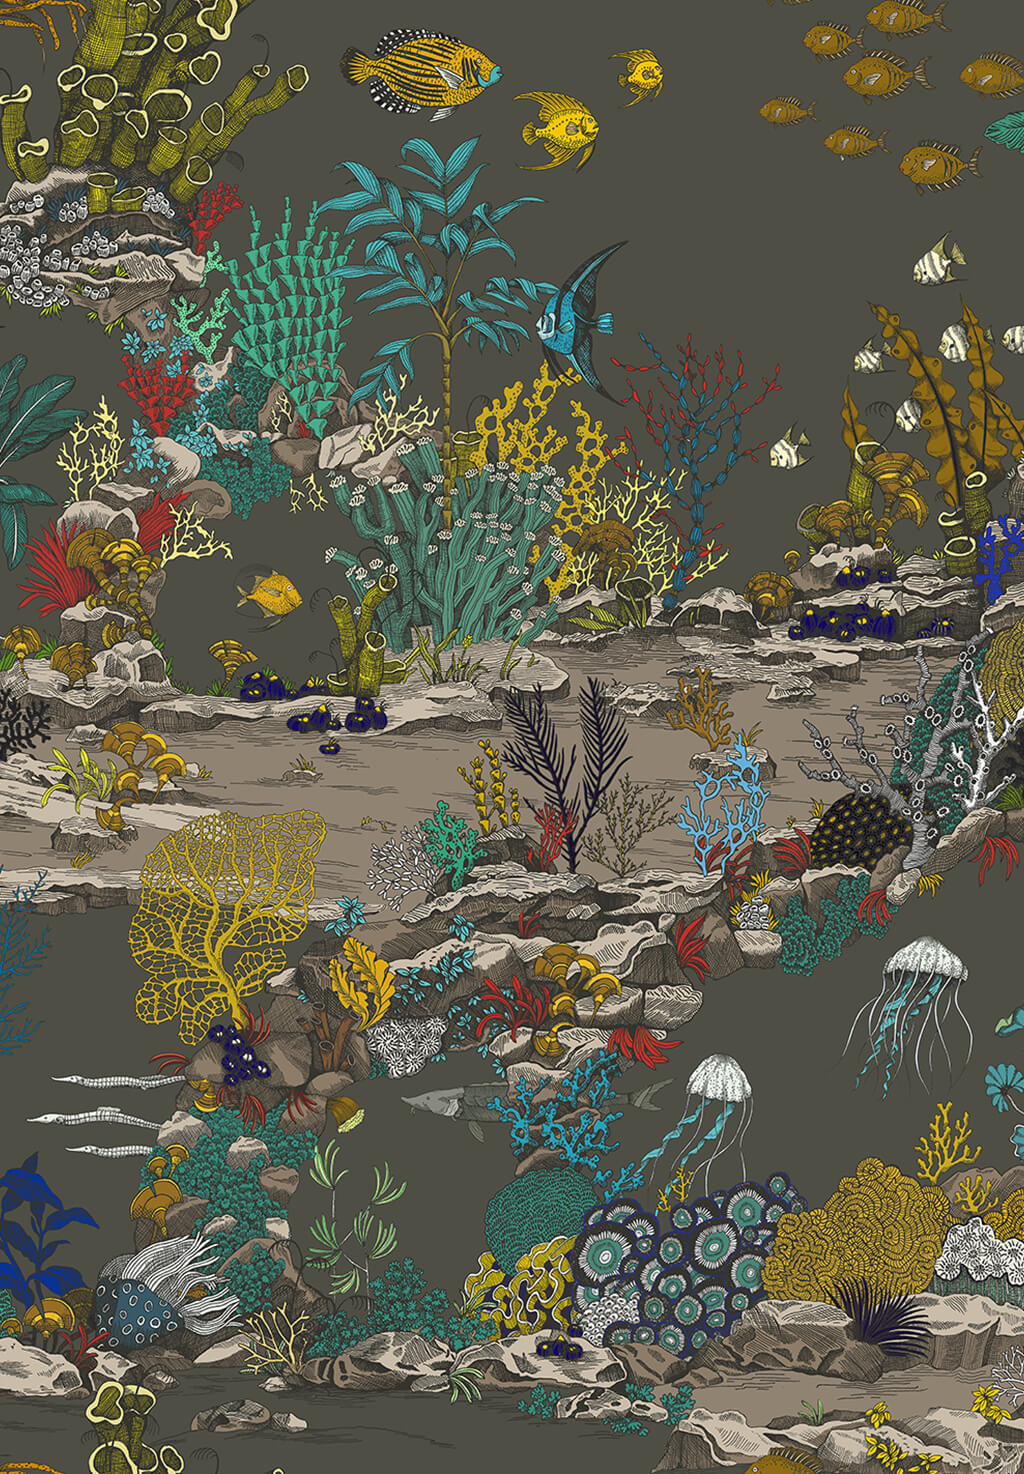 images/productimages/small/jmw-100302-section-underwater-jungle-section-graphite-and-jewel-highlights-72-dpi-1024-x-1471-.jpg